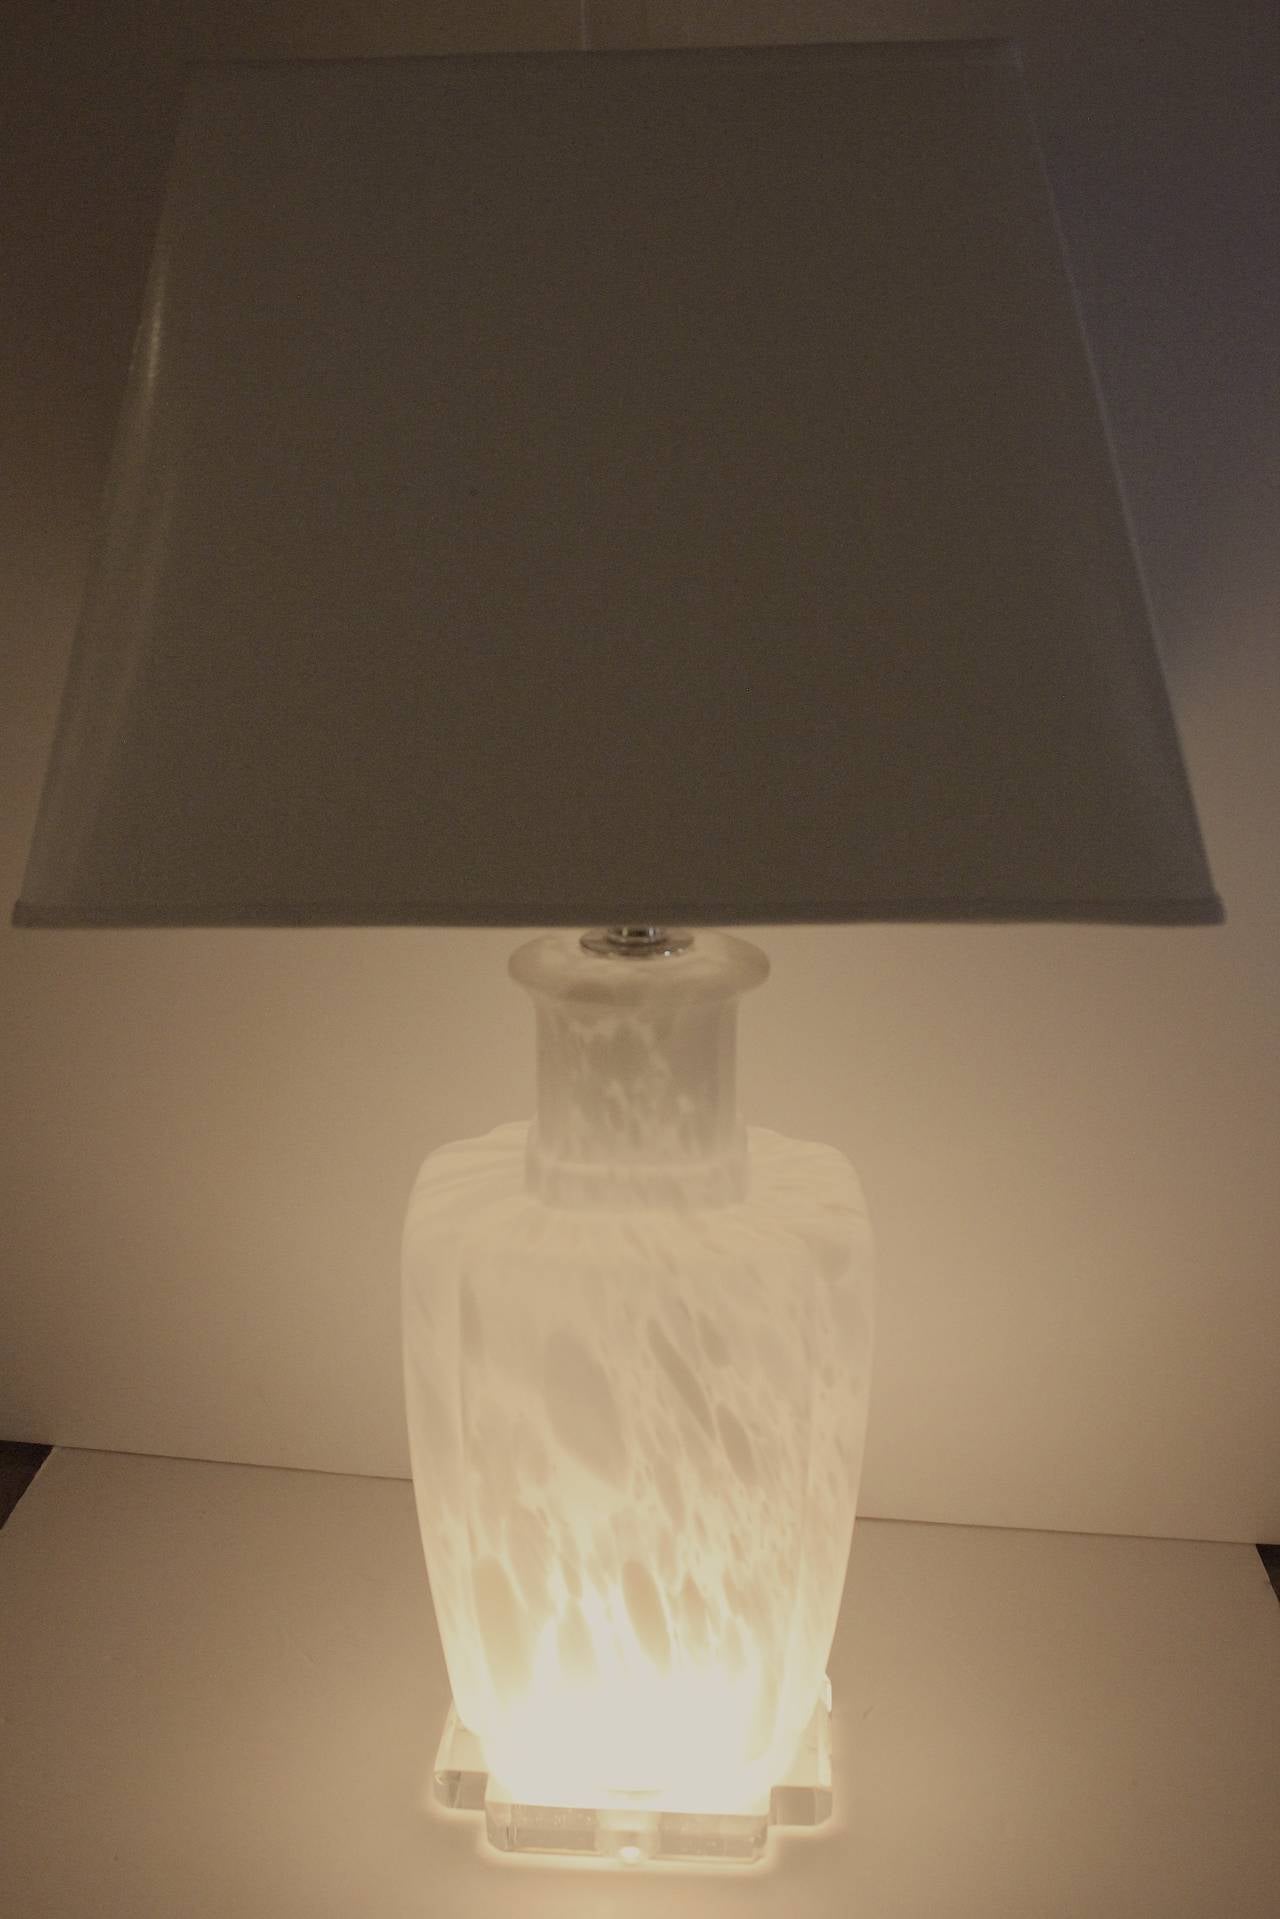 1960s chic Murano glass lamp on a polished clear Lucite base. Vase form body of white and clear gray marble pattern glass. Chrome stem, modern clear Lucite finial. The base lights up with a cord switch as well as the regular bulb under the shade-the